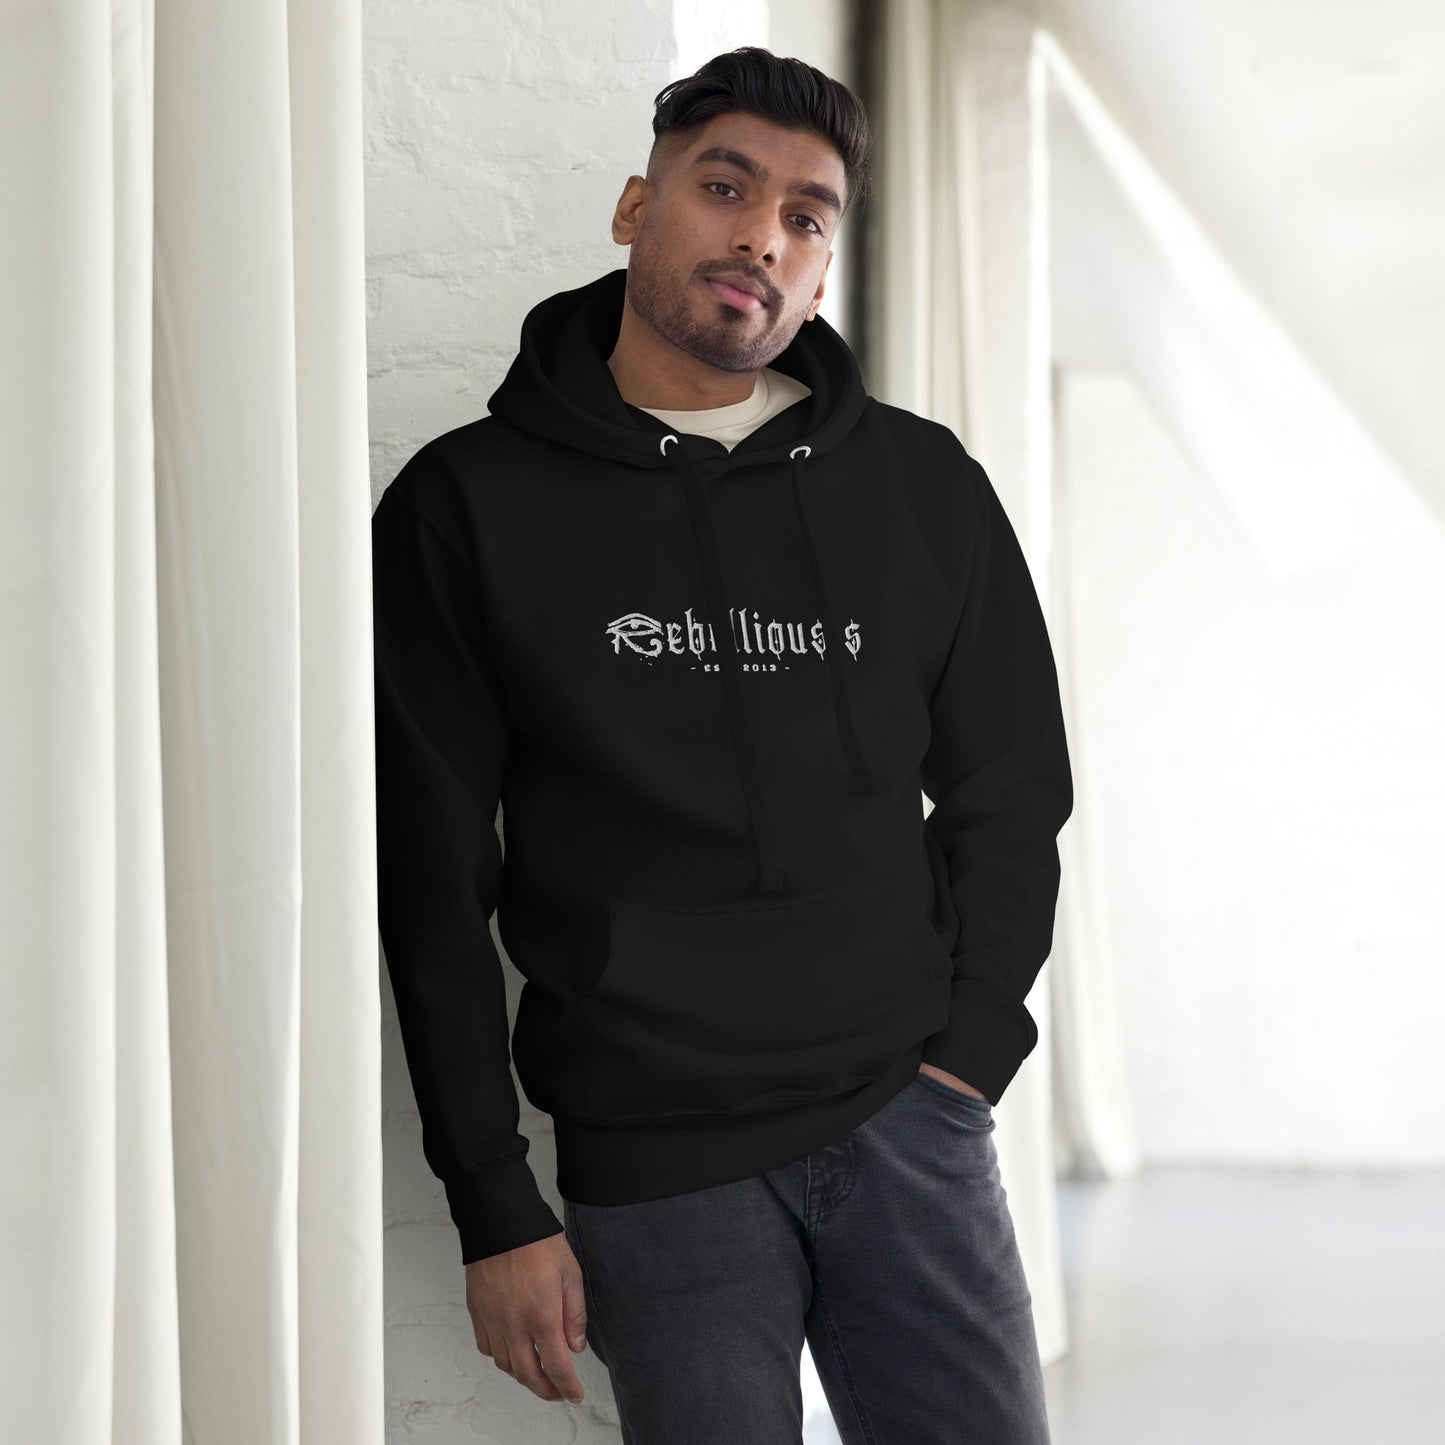 Rebellious1s 'Reconnect With Self' Hoodie - REBELLIOUS1S